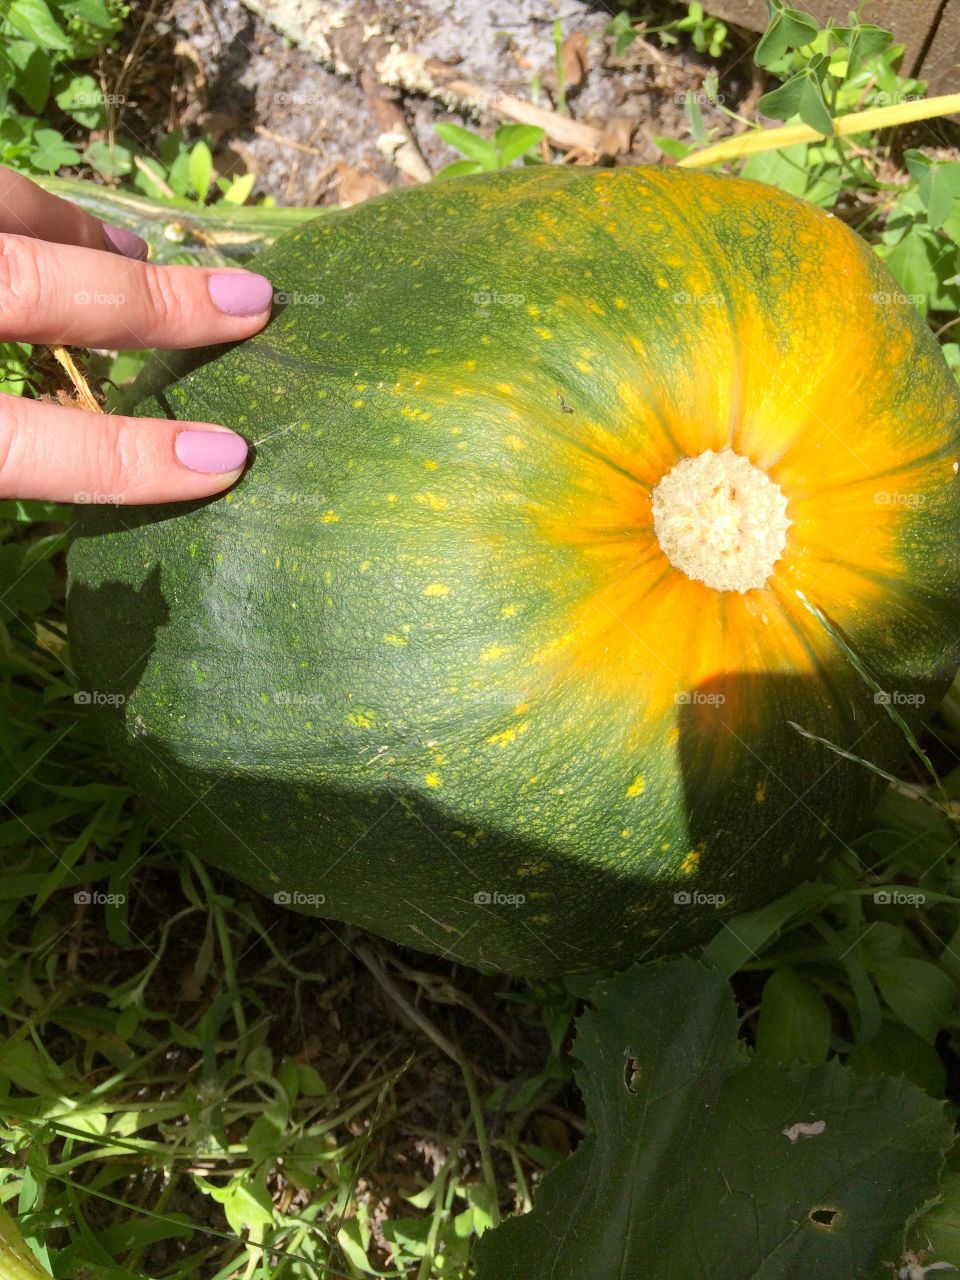 Here is our biggest surprise pumpkins to date! It came from the guts of last years Jackolanterns!